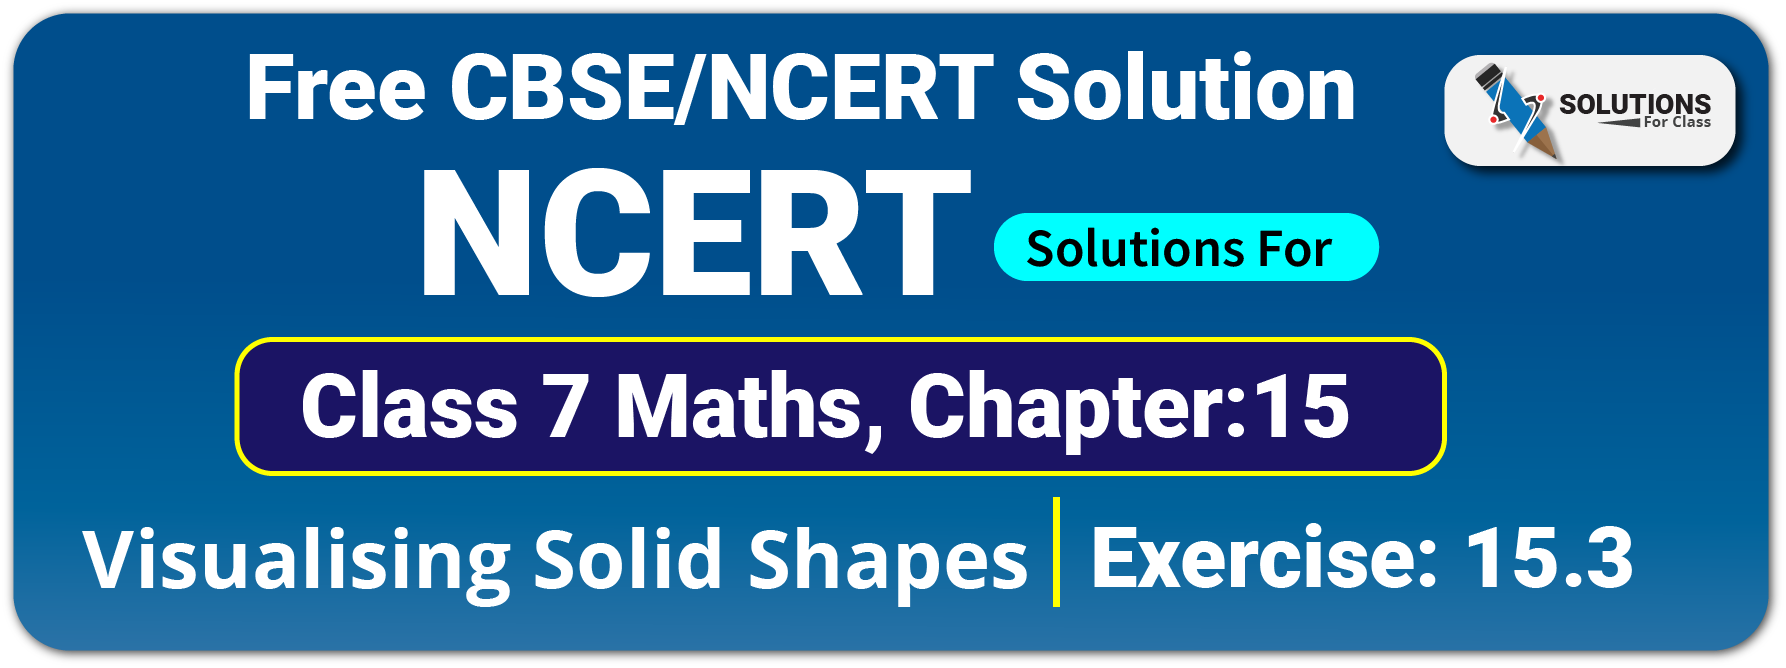 NCERT Solutions For Class 7 Maths Chapter 15 Visulising Solid Shapes Exercise 15.3